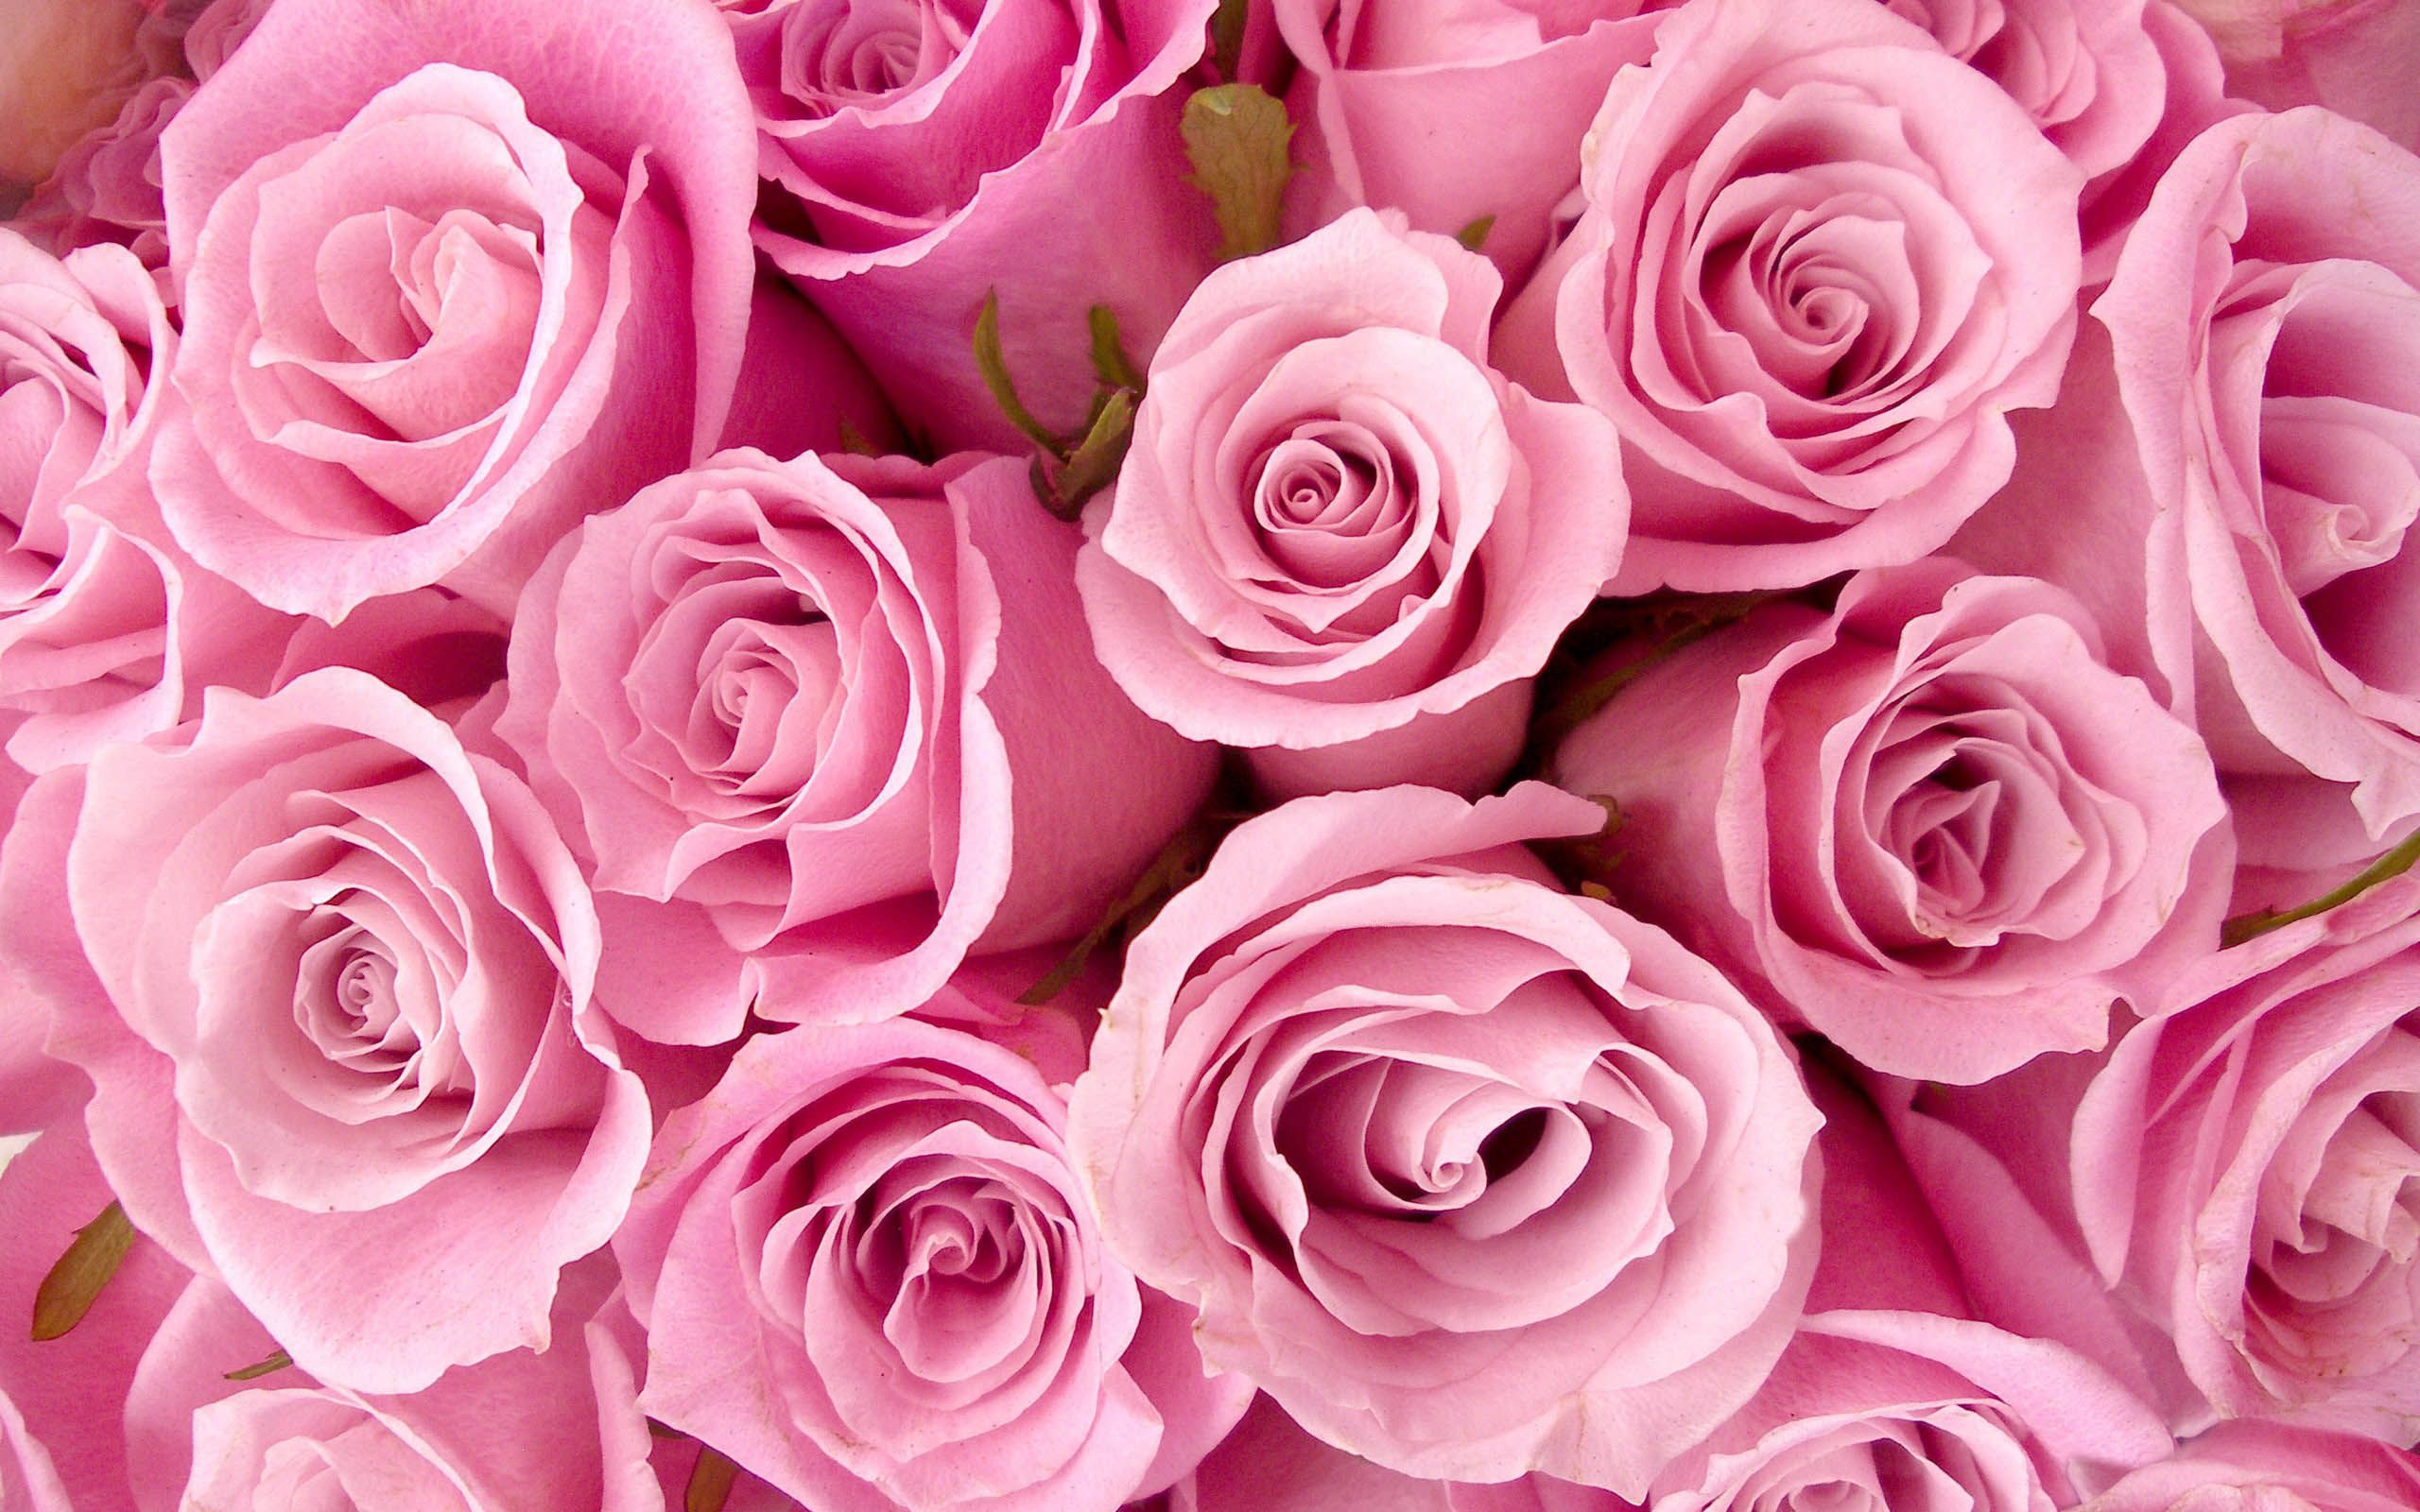 Gorgeous Roses: The Meaning of Rose Colors [35 PICS]